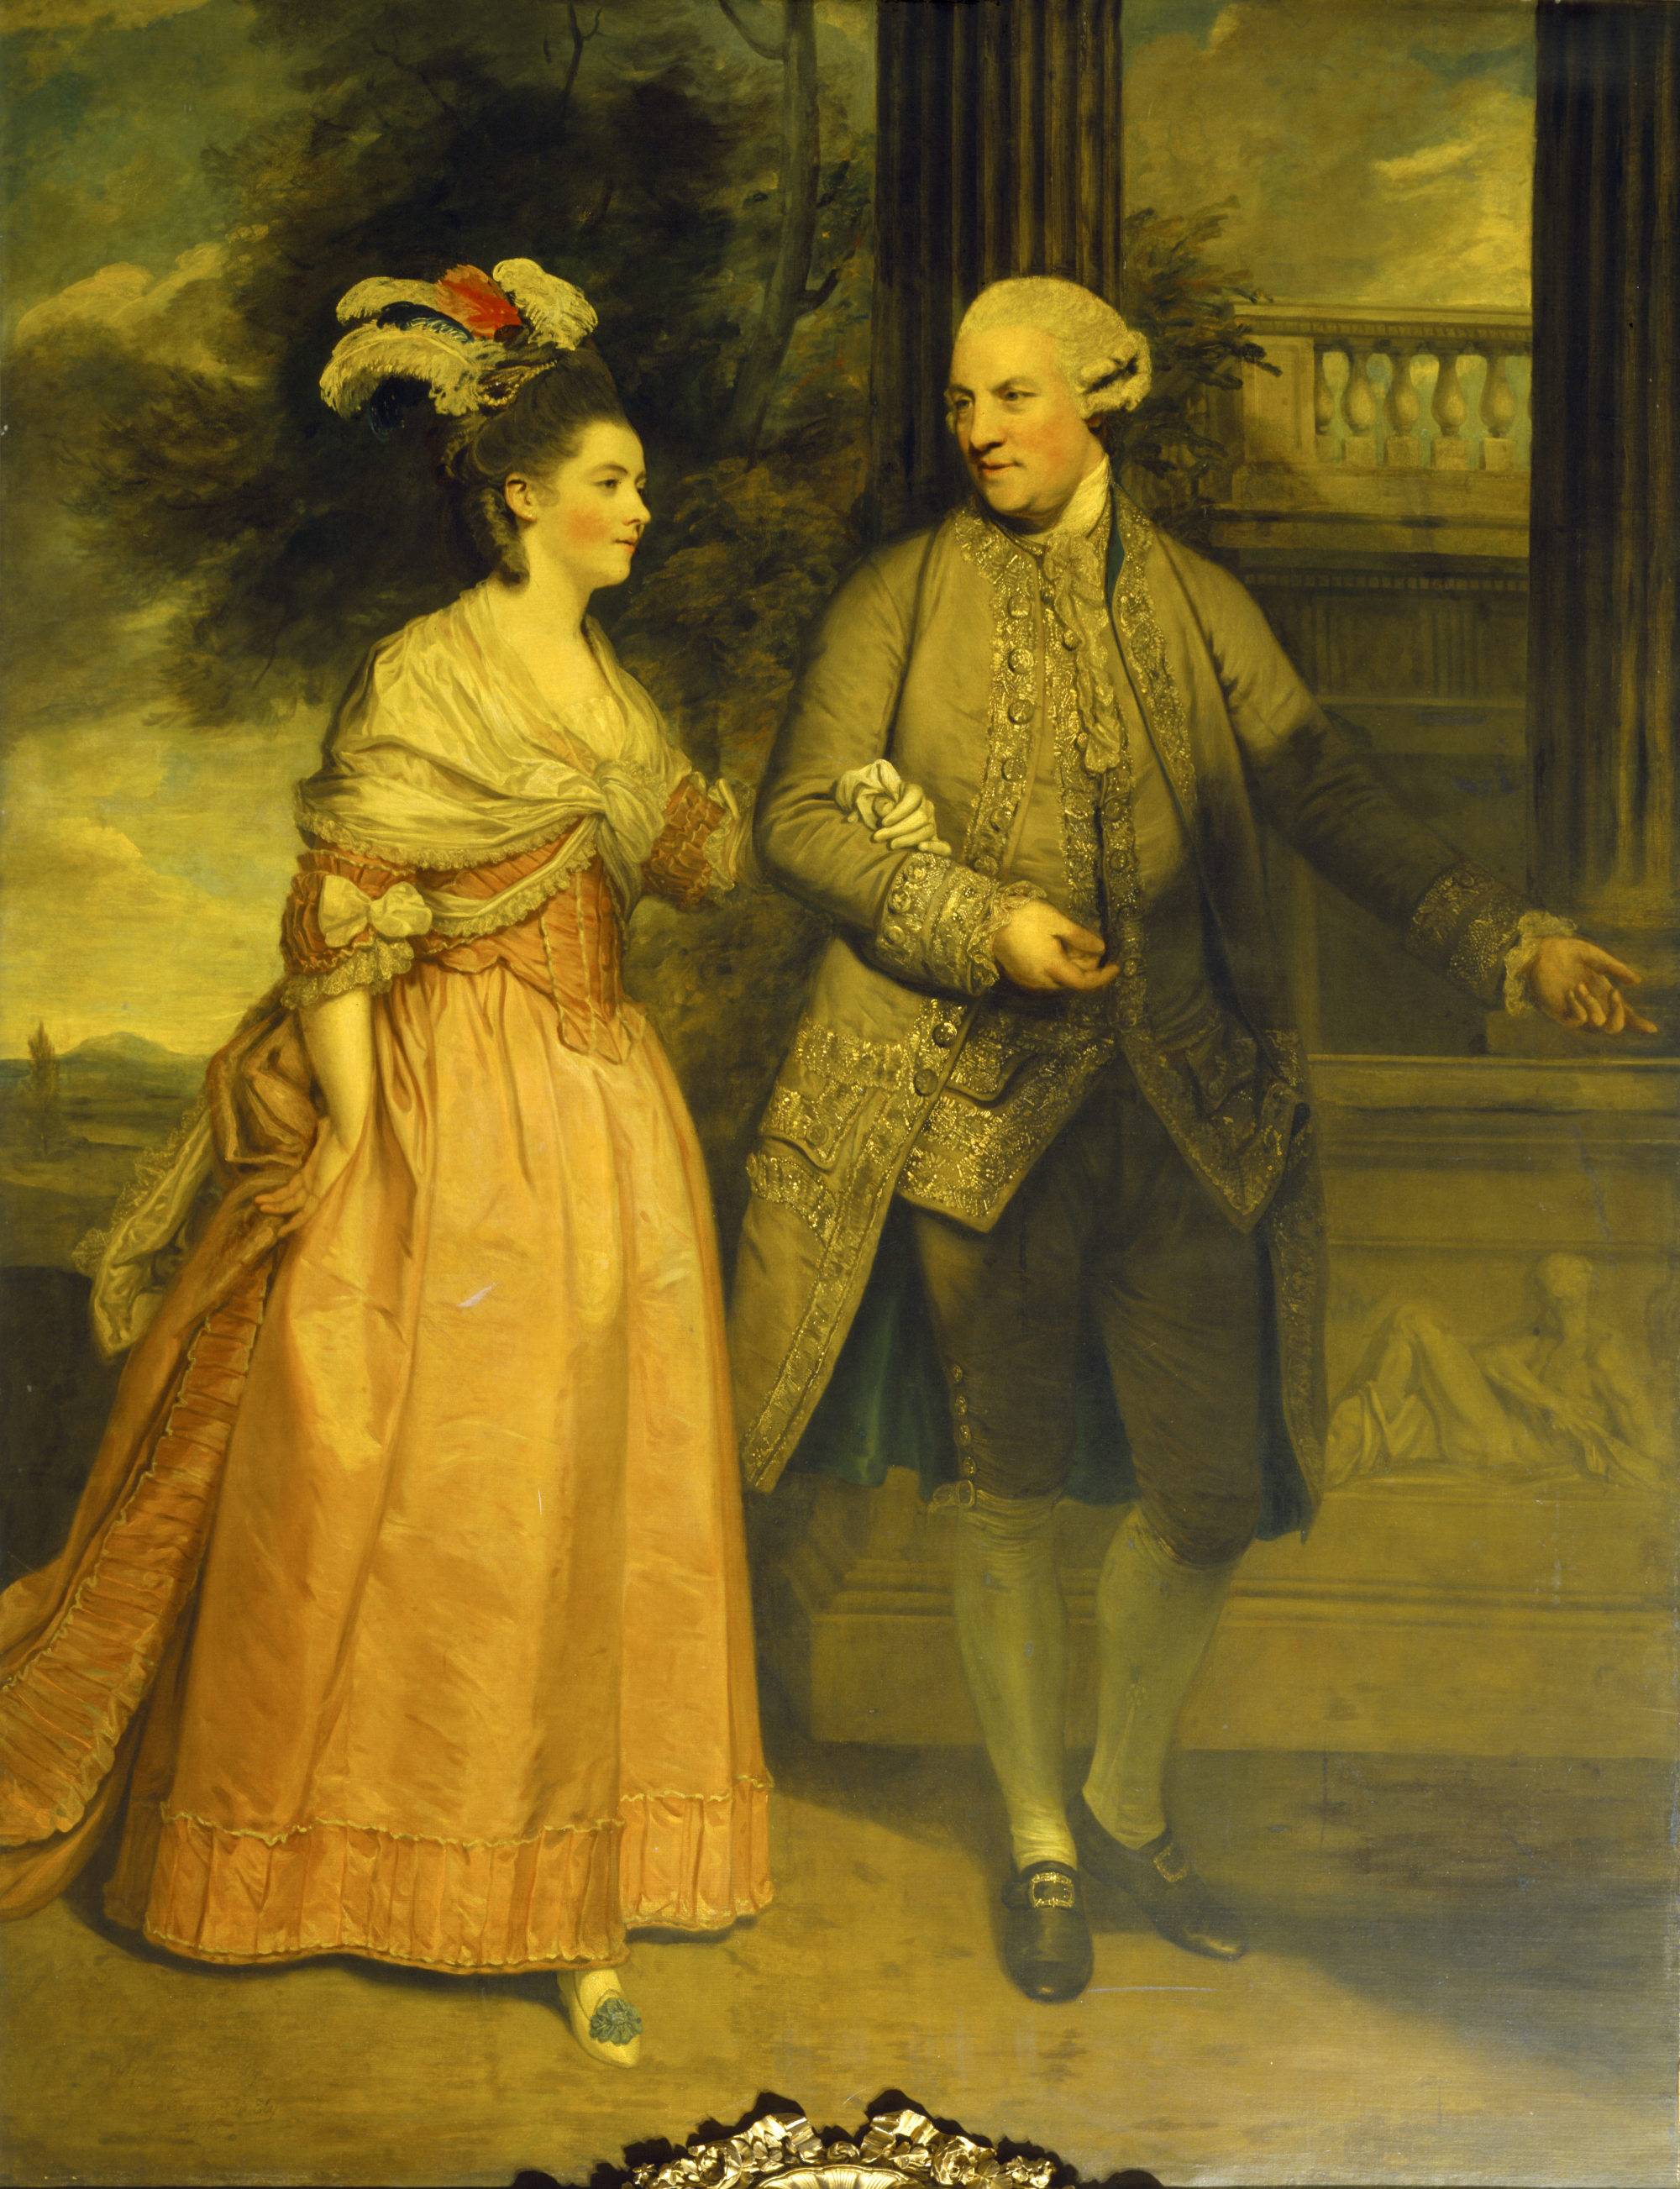 Henry Loftus, 1st Earl of Ely (1709-1783) and his wife Frances Monroe, Countess of Ely (d.1821), in c. 1775, by Sir Joshua Reynold. Oil painting on canvas. © National Trust/Angelo Horne.